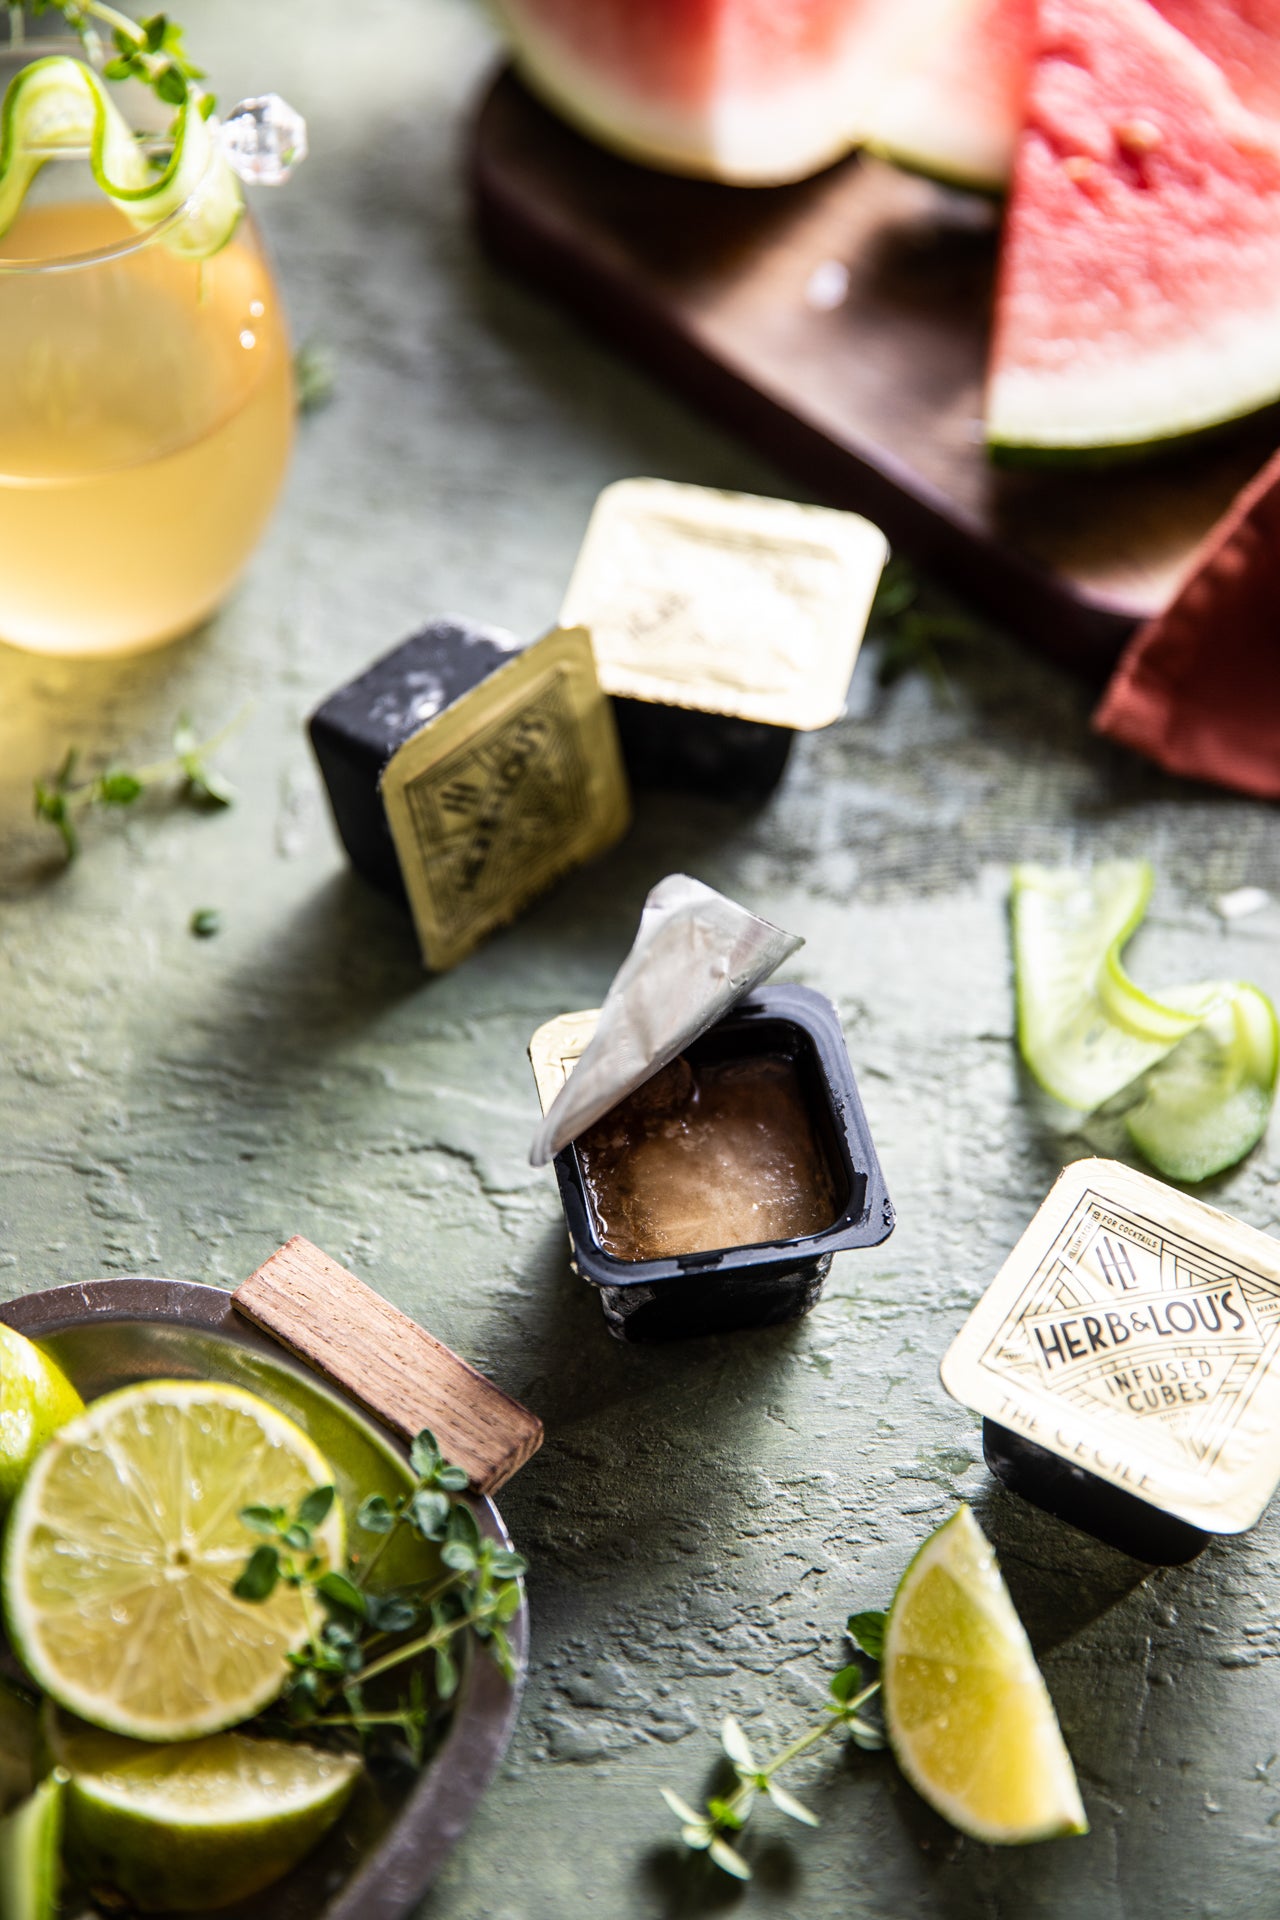 Herb & Lou's Infused Cocktail Cubes - The Clyde, Simply Add Vodka or Rum,  Peach Cosmopolitan with Benedictine-Inspired Herbs & Artisanal Bitters